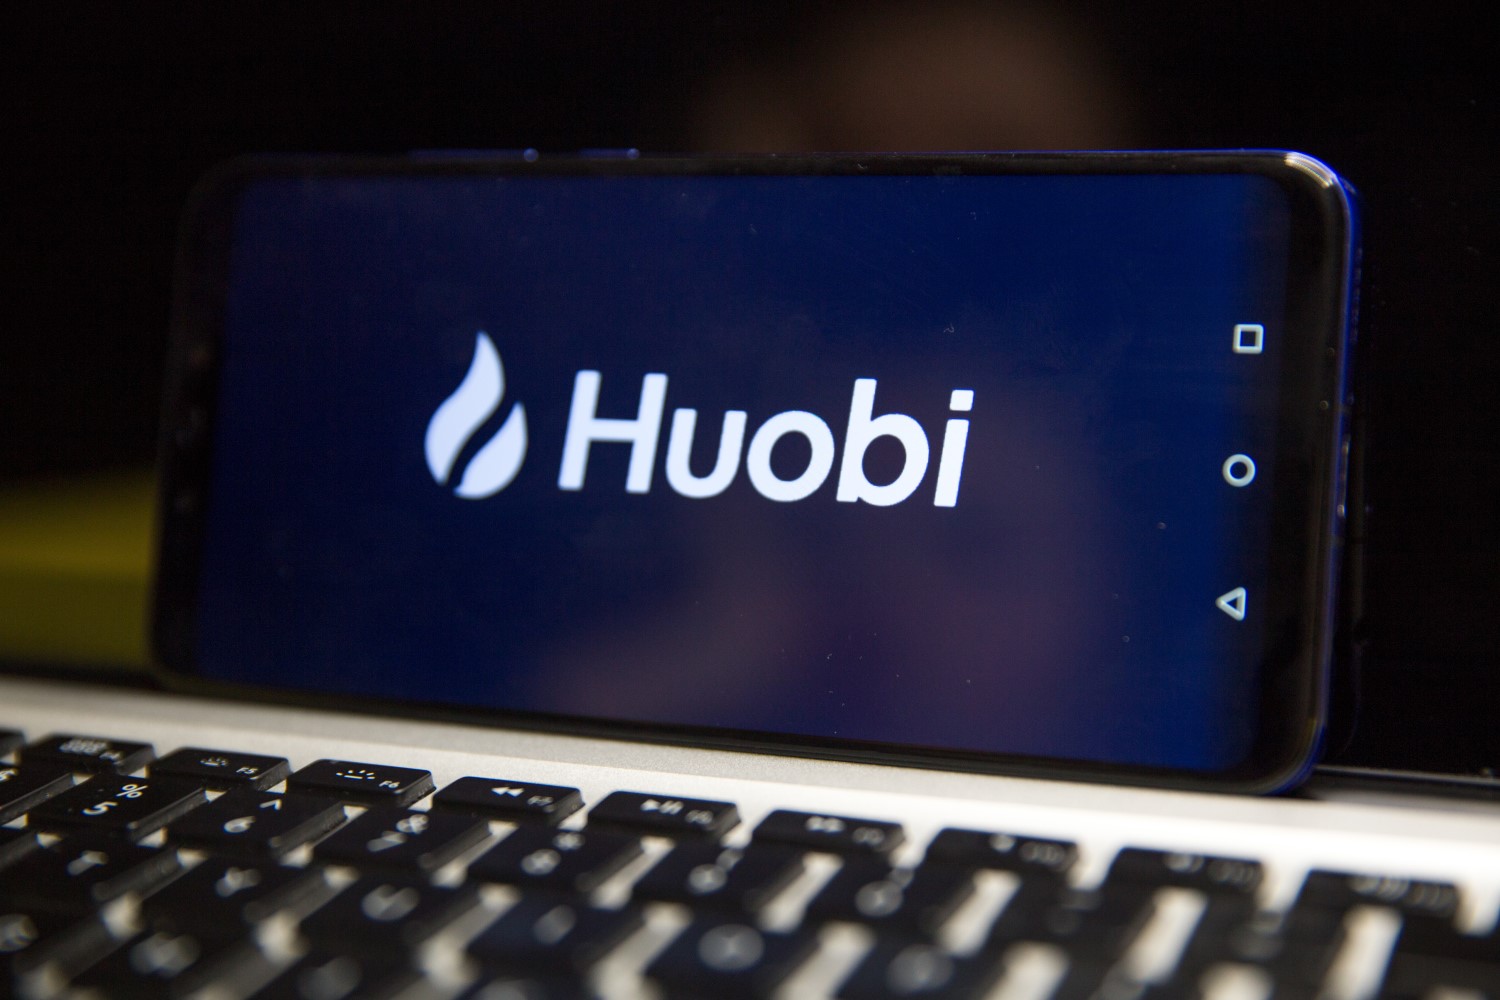 Huobi Unverified Withdrawal Limit | Alternatives to Huobi for trading cryptocurrencies